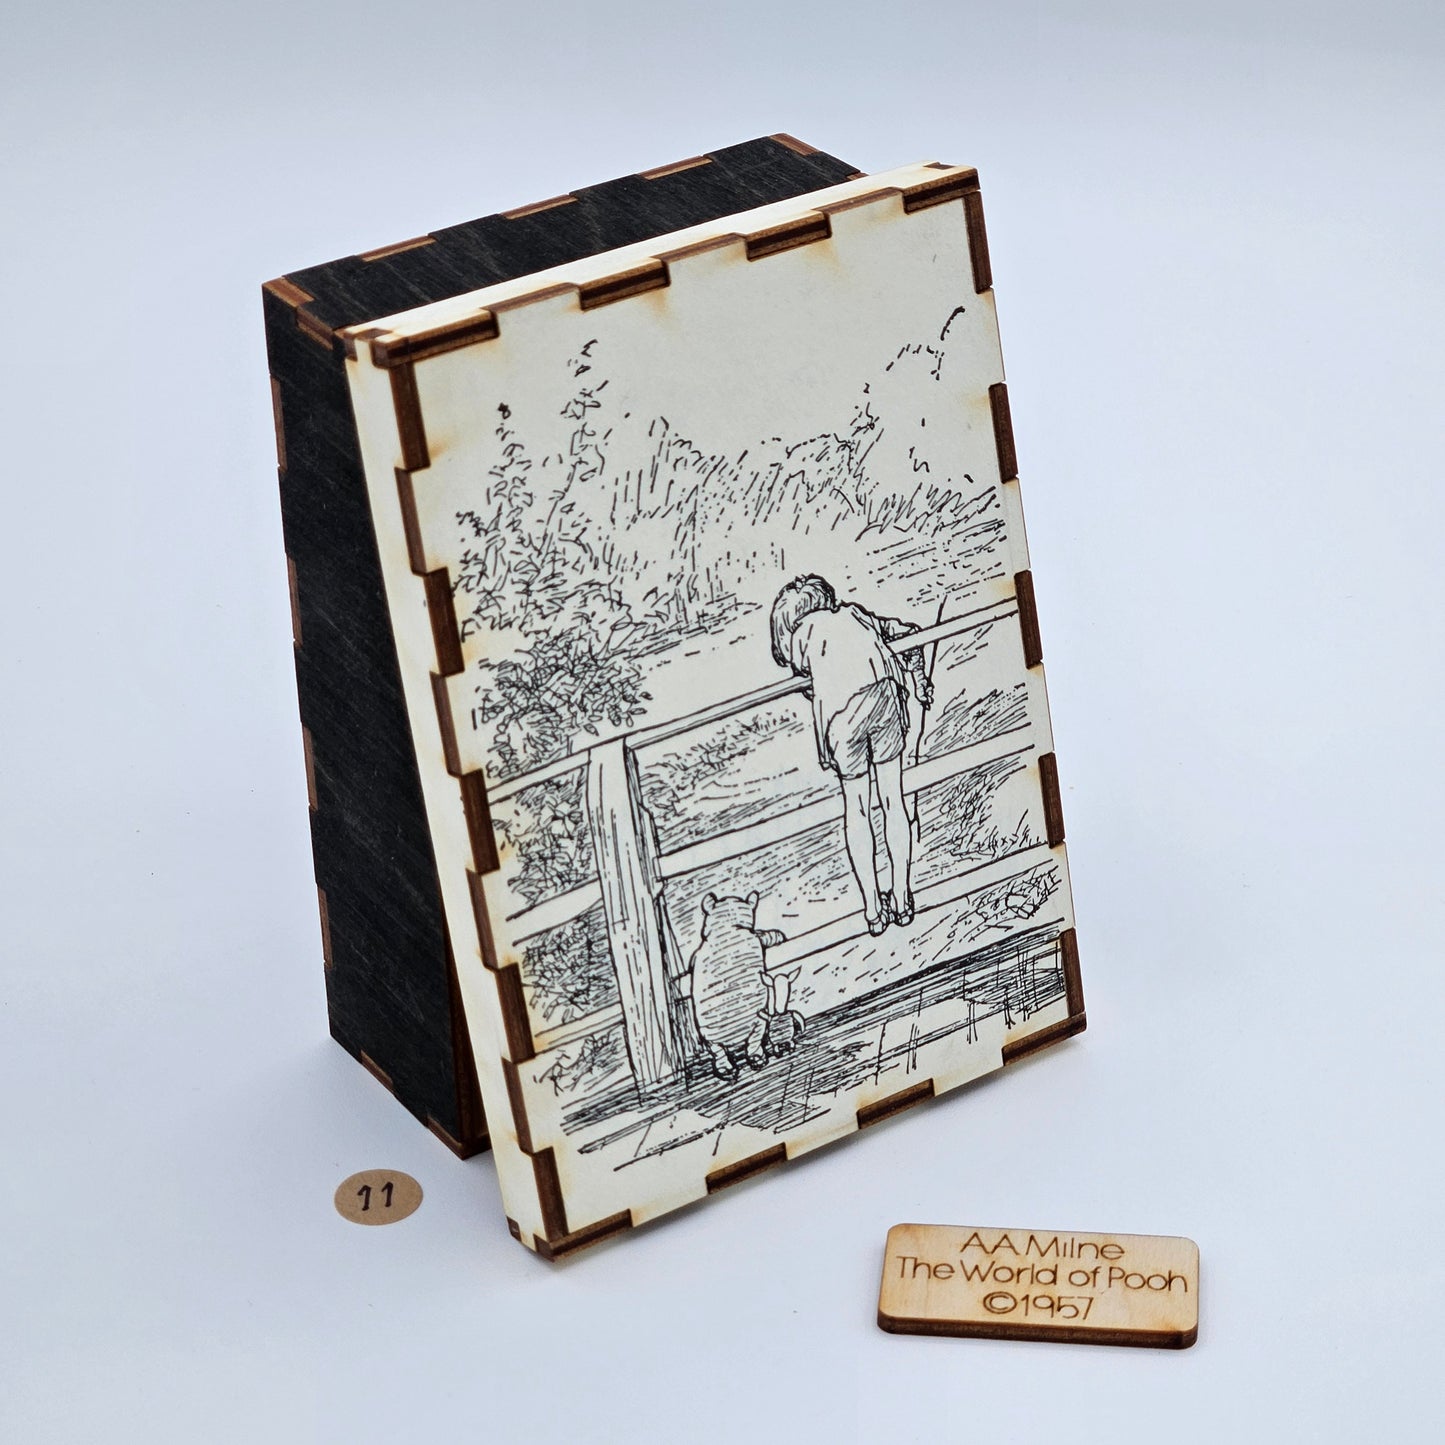 1957 "The World of Pooh" Story Boxes